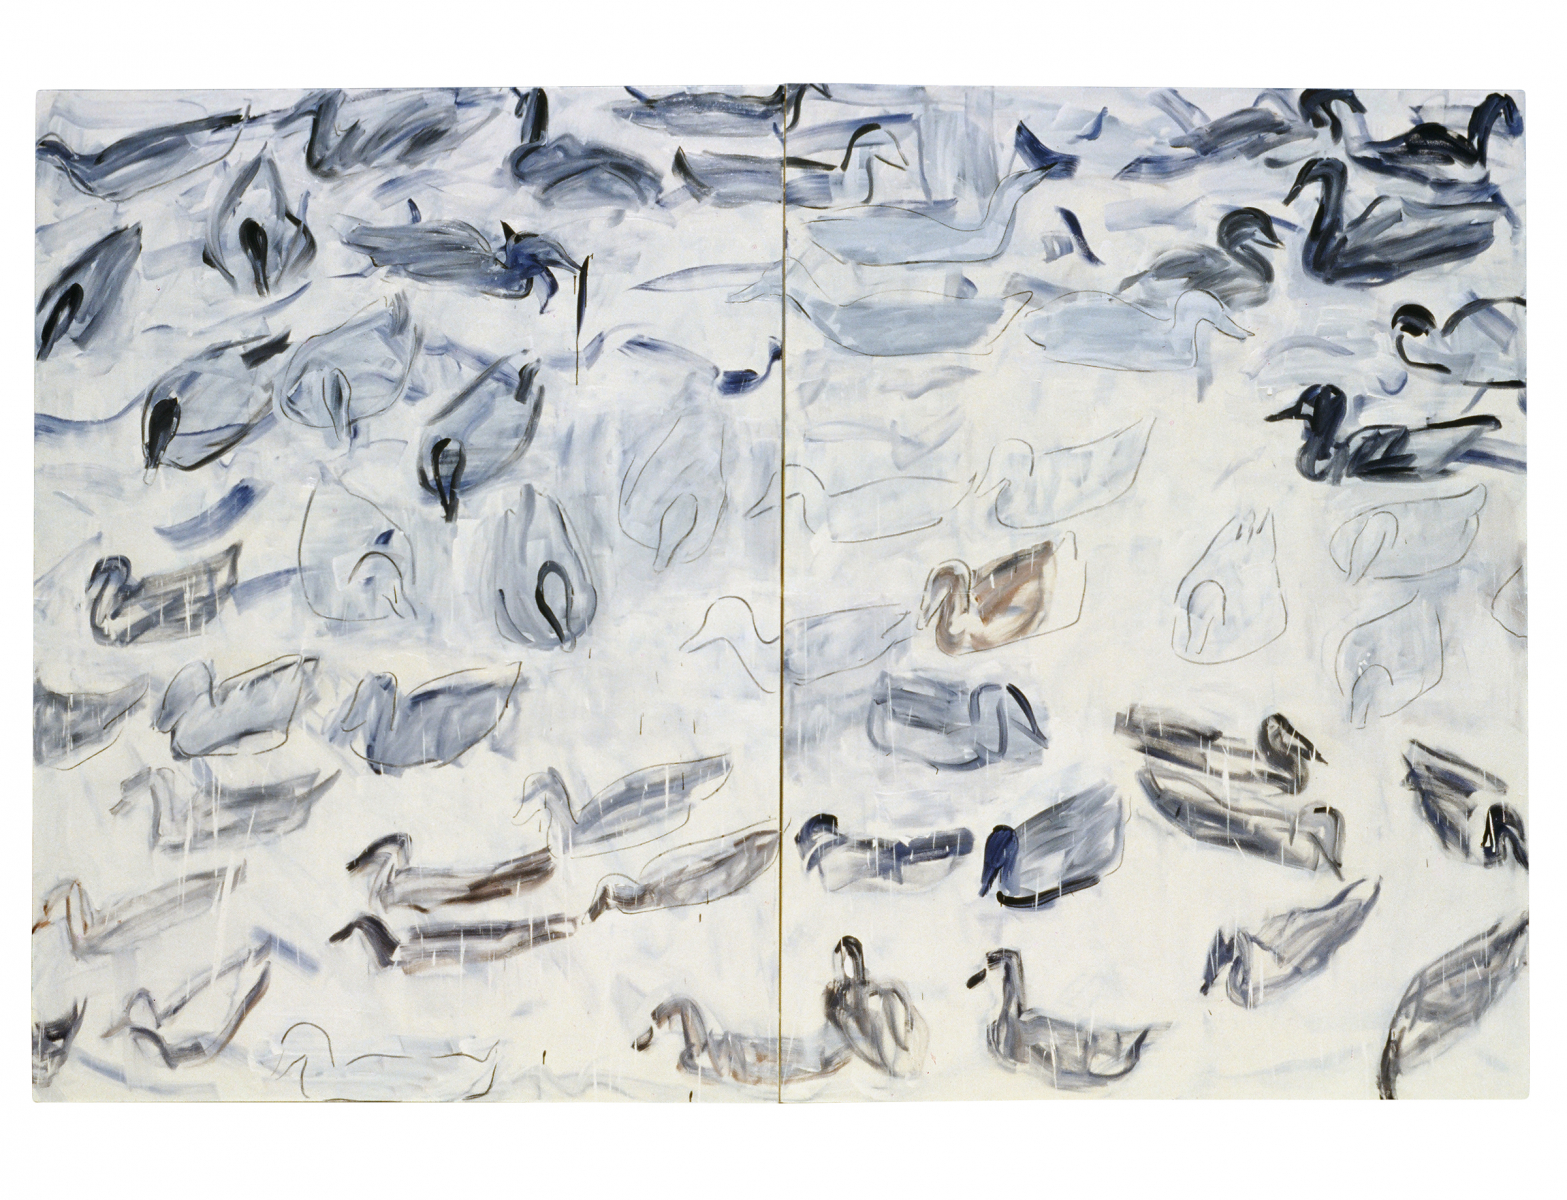 Untitled-89010, 1989, Oil on Canvas, 160x105.7cm (each)